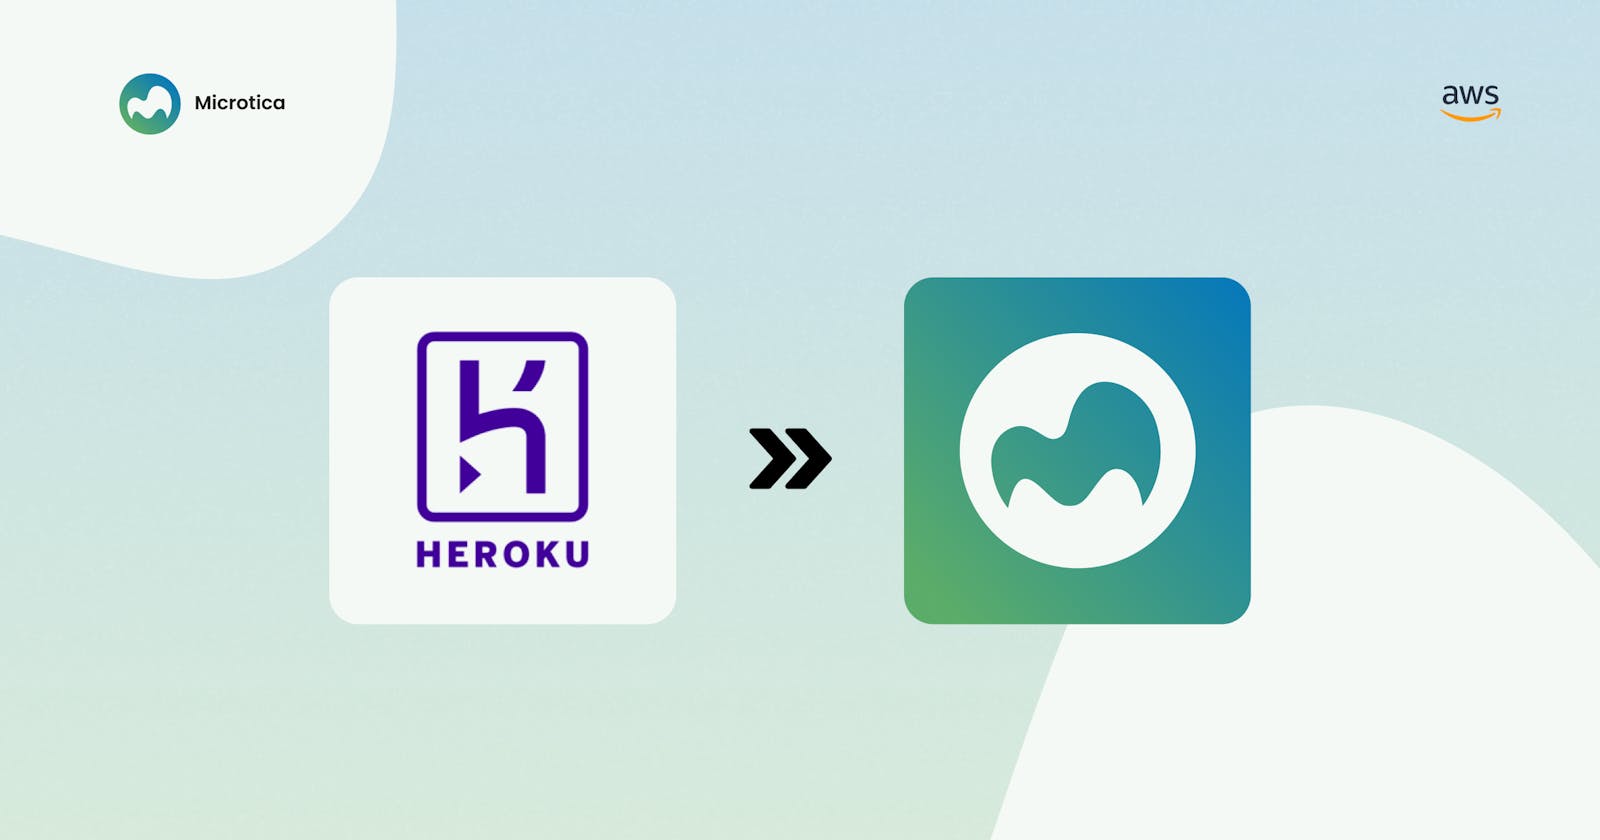 Top 5 Reasons to Switch from Heroku to Microtica